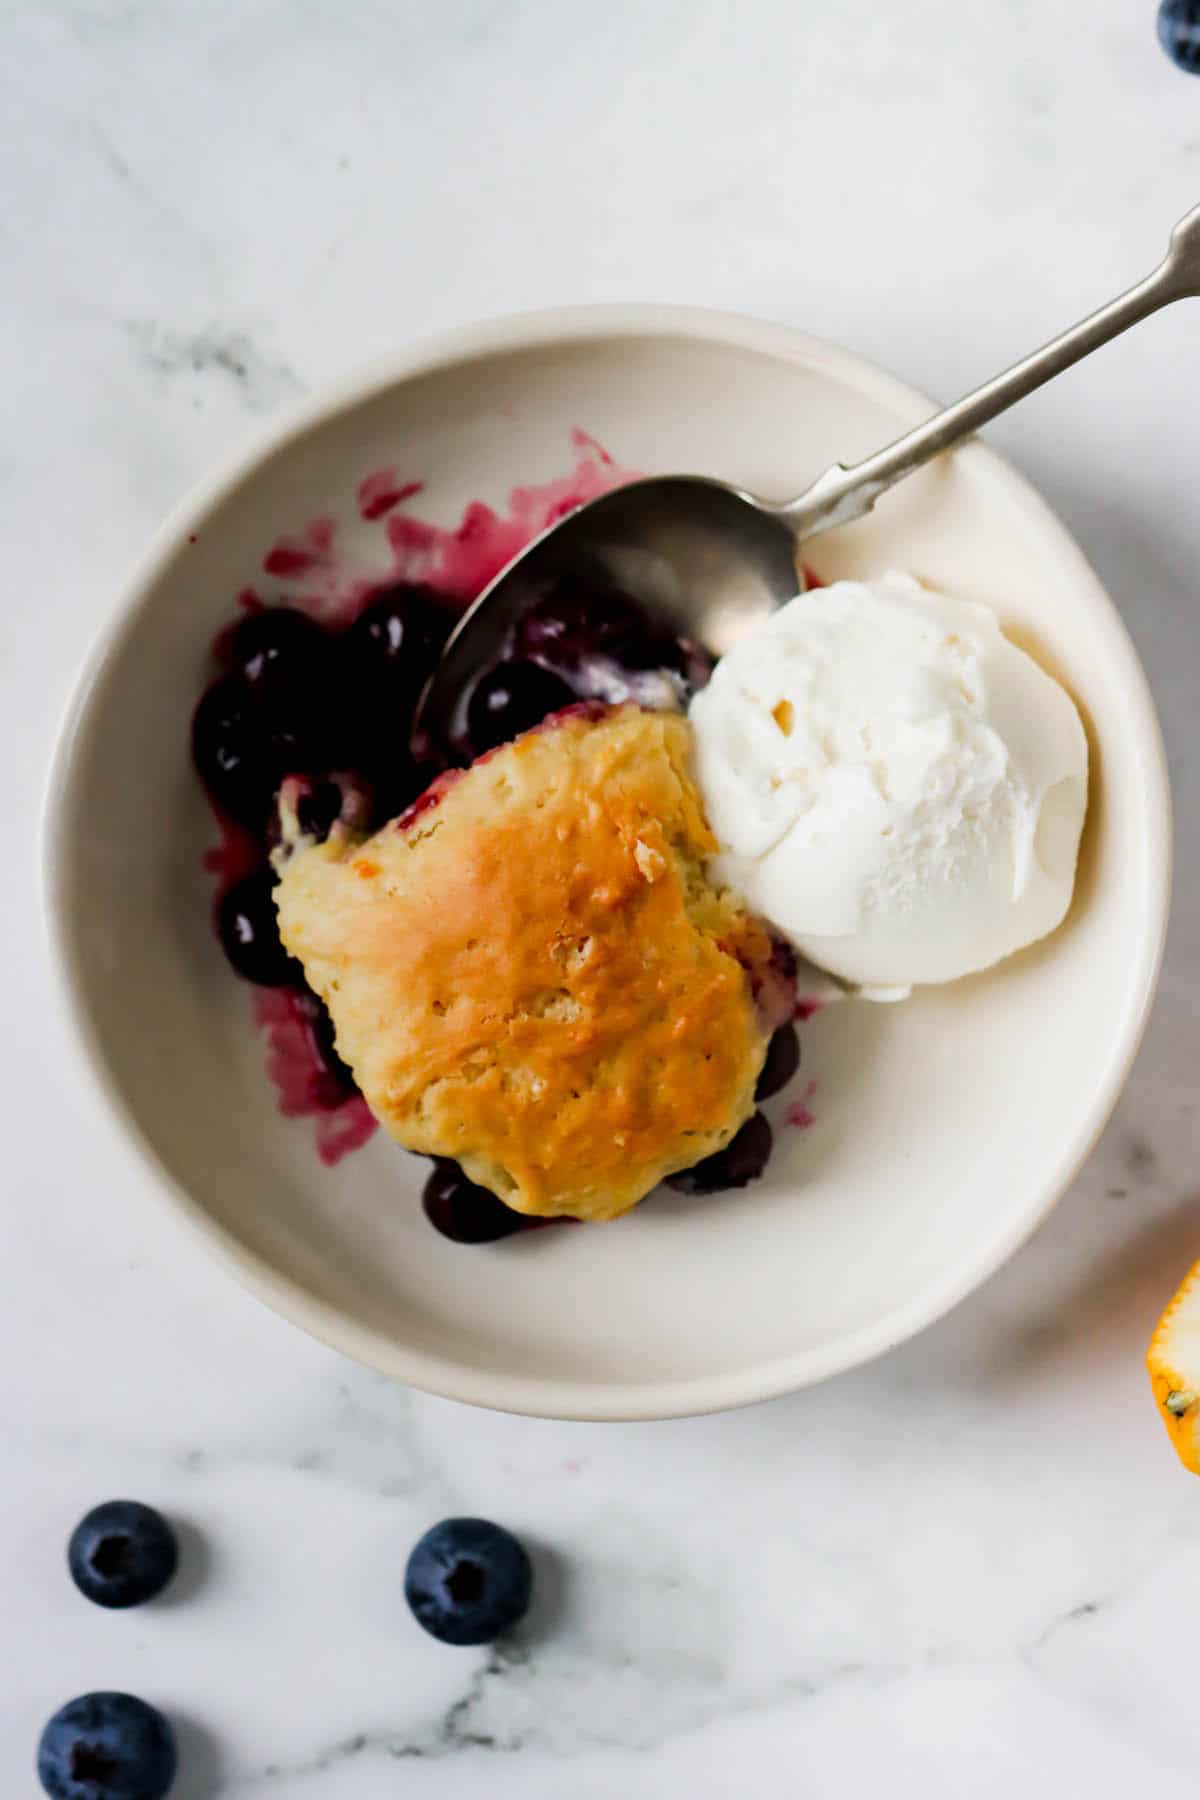 A dish of blueberry cobbler with a scoop of vanilla ice cream